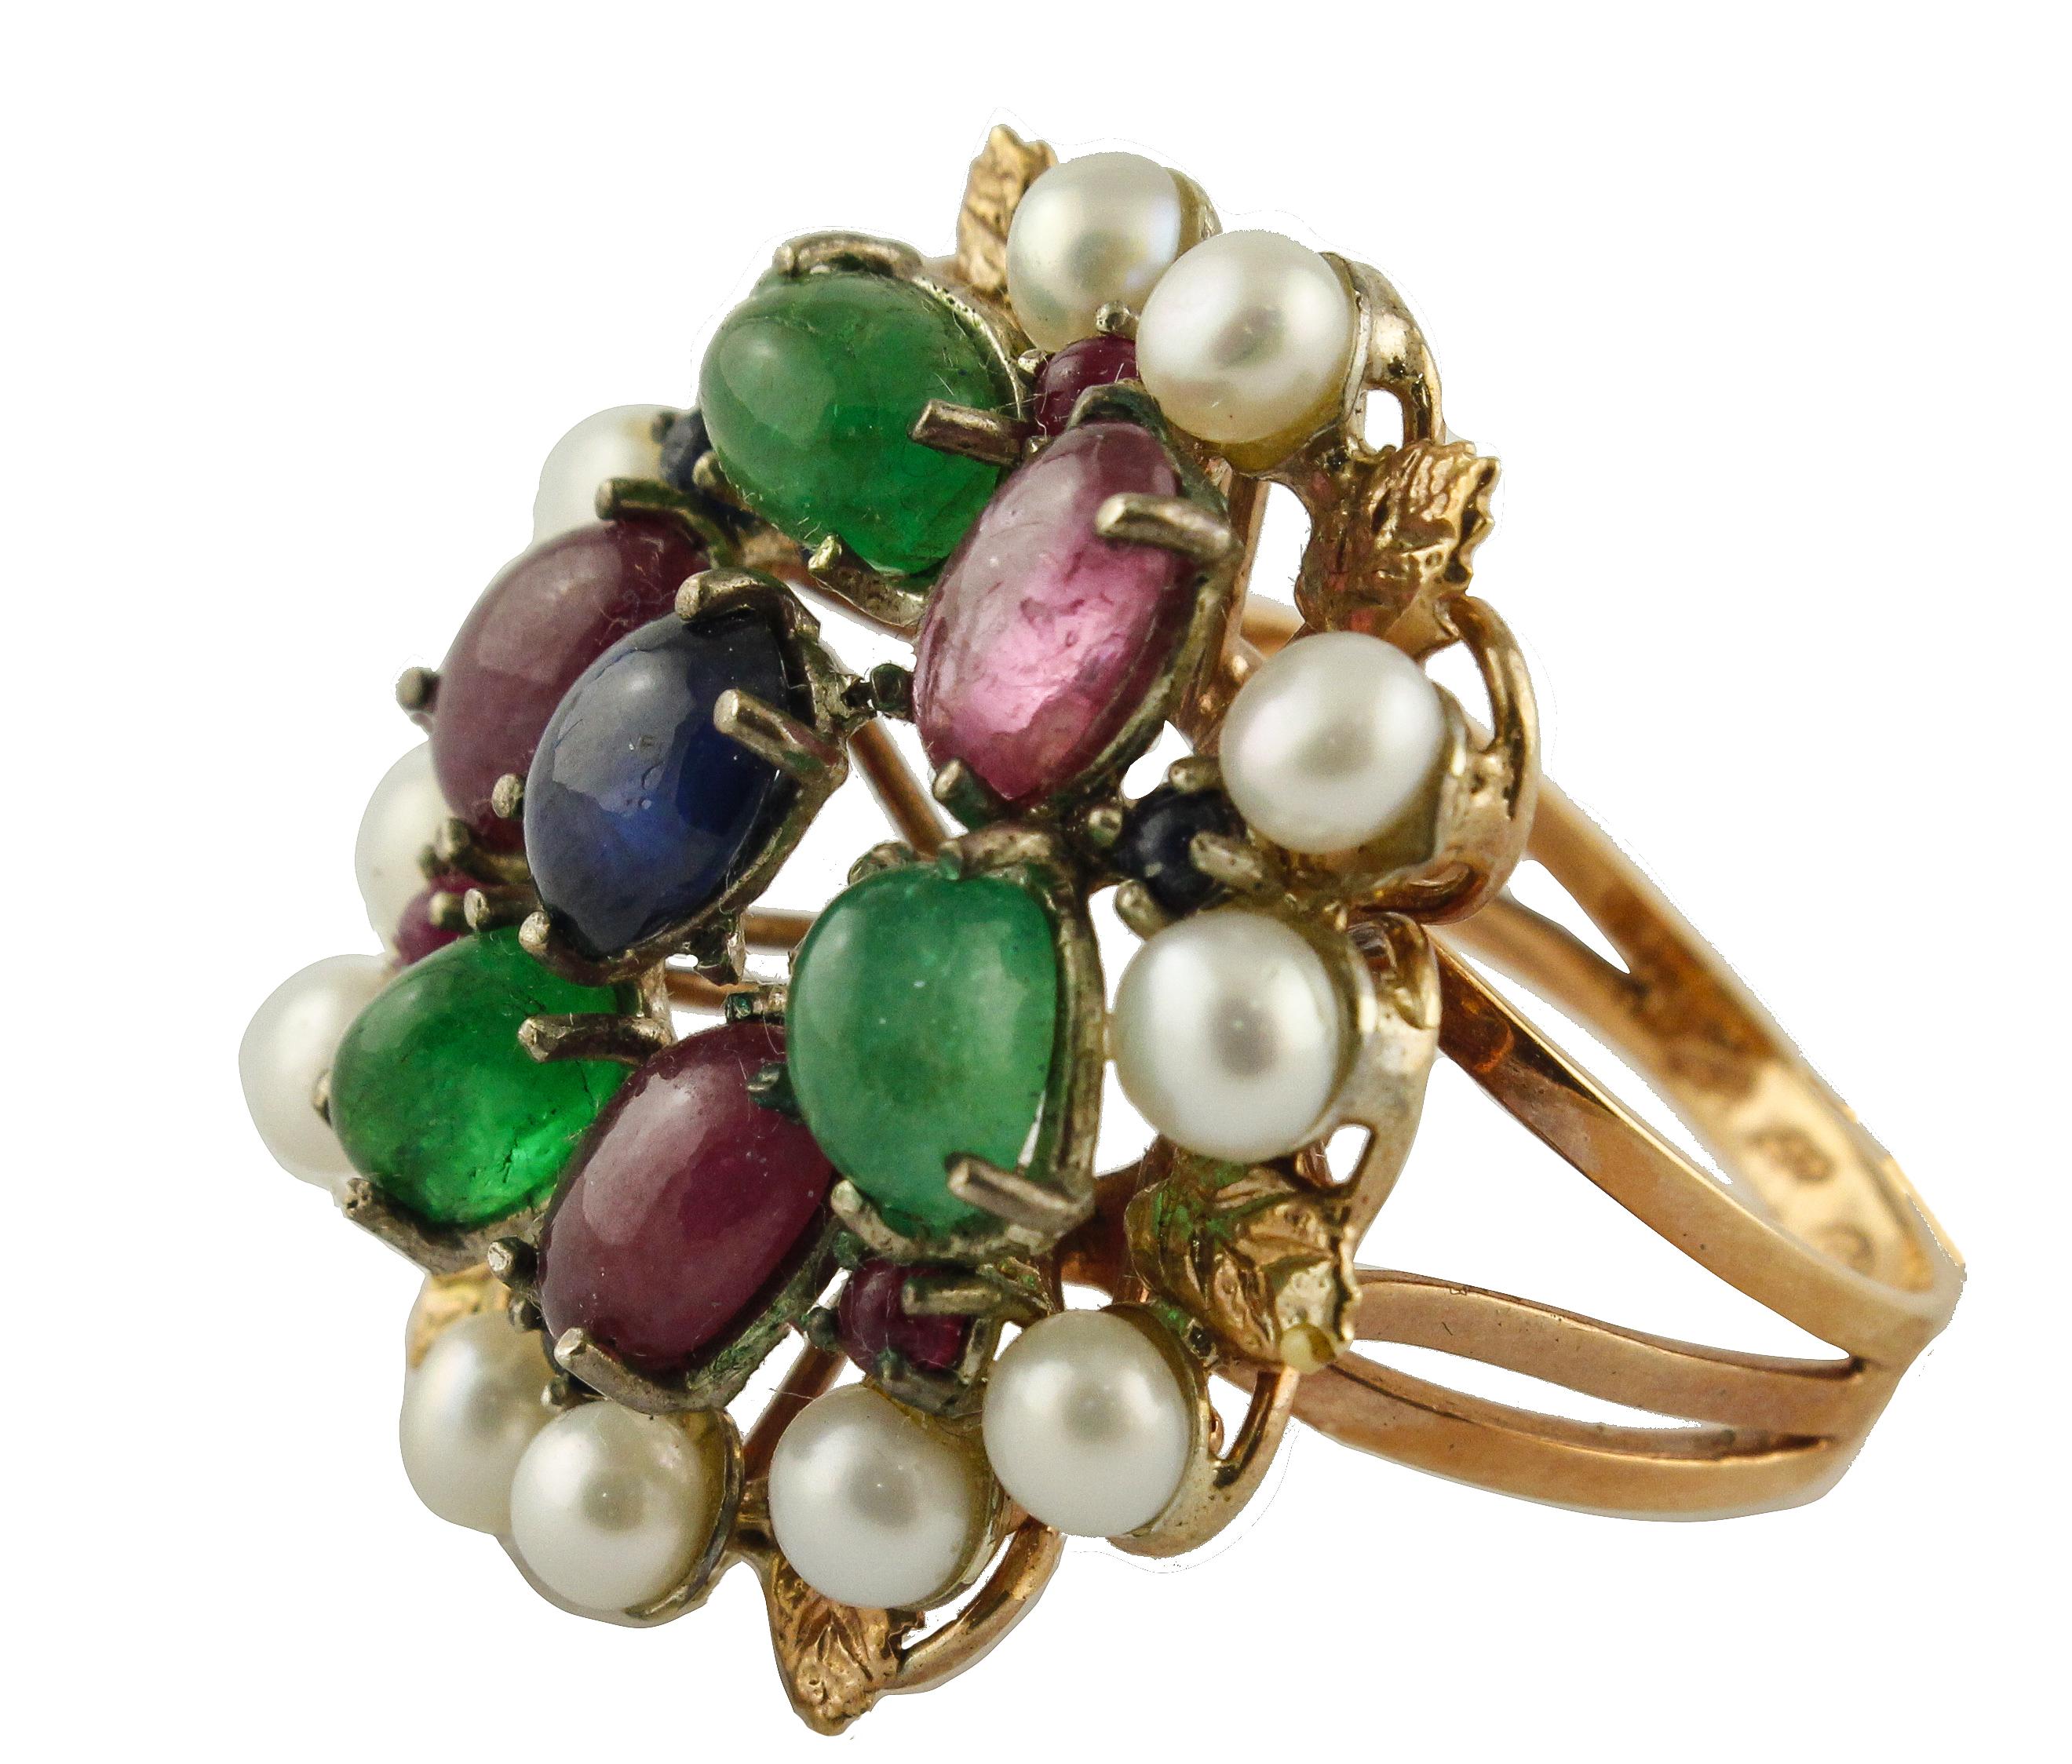 SHIPPING POLICY:
No additional costs will be added to this order.
Shipping costs will be totally covered by the seller (customs duties included).

Fabulous fashion ring in 9K rose gold and silver composed of blue sapphires, rubies and emeralds in